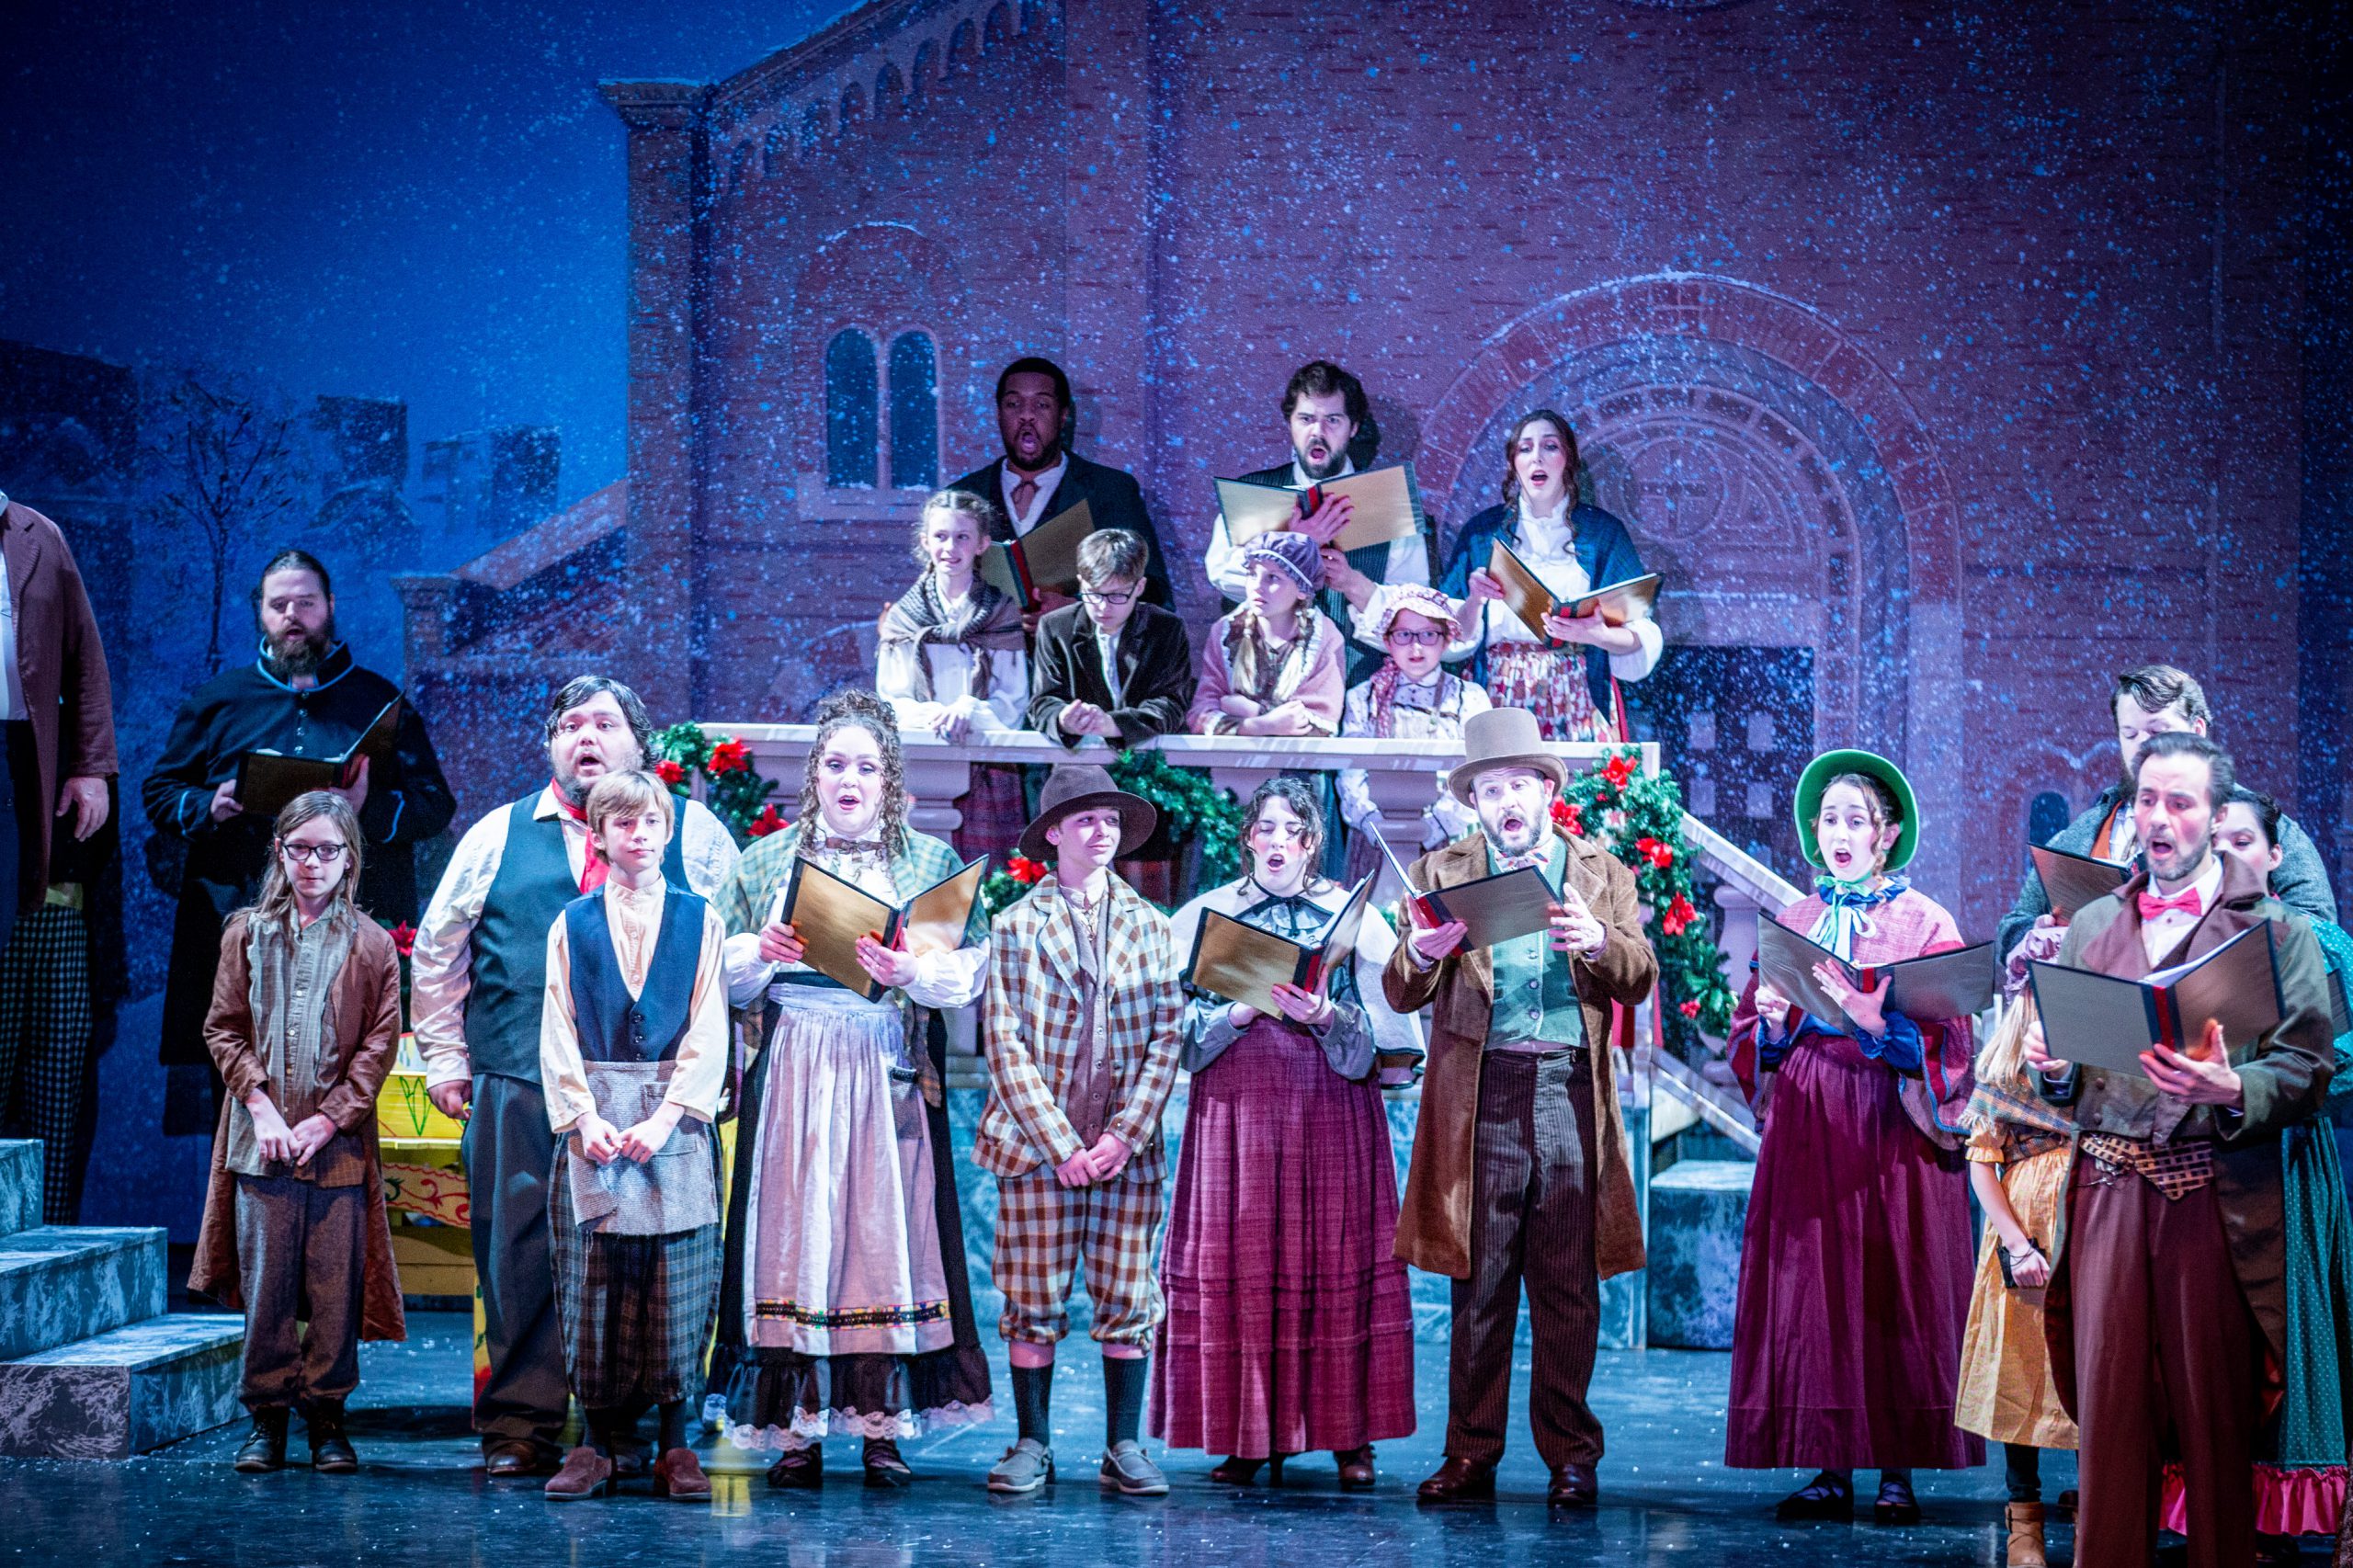 Enter to win 2 Section II tickets to Cosi fan tutte or Il Trovatore!!